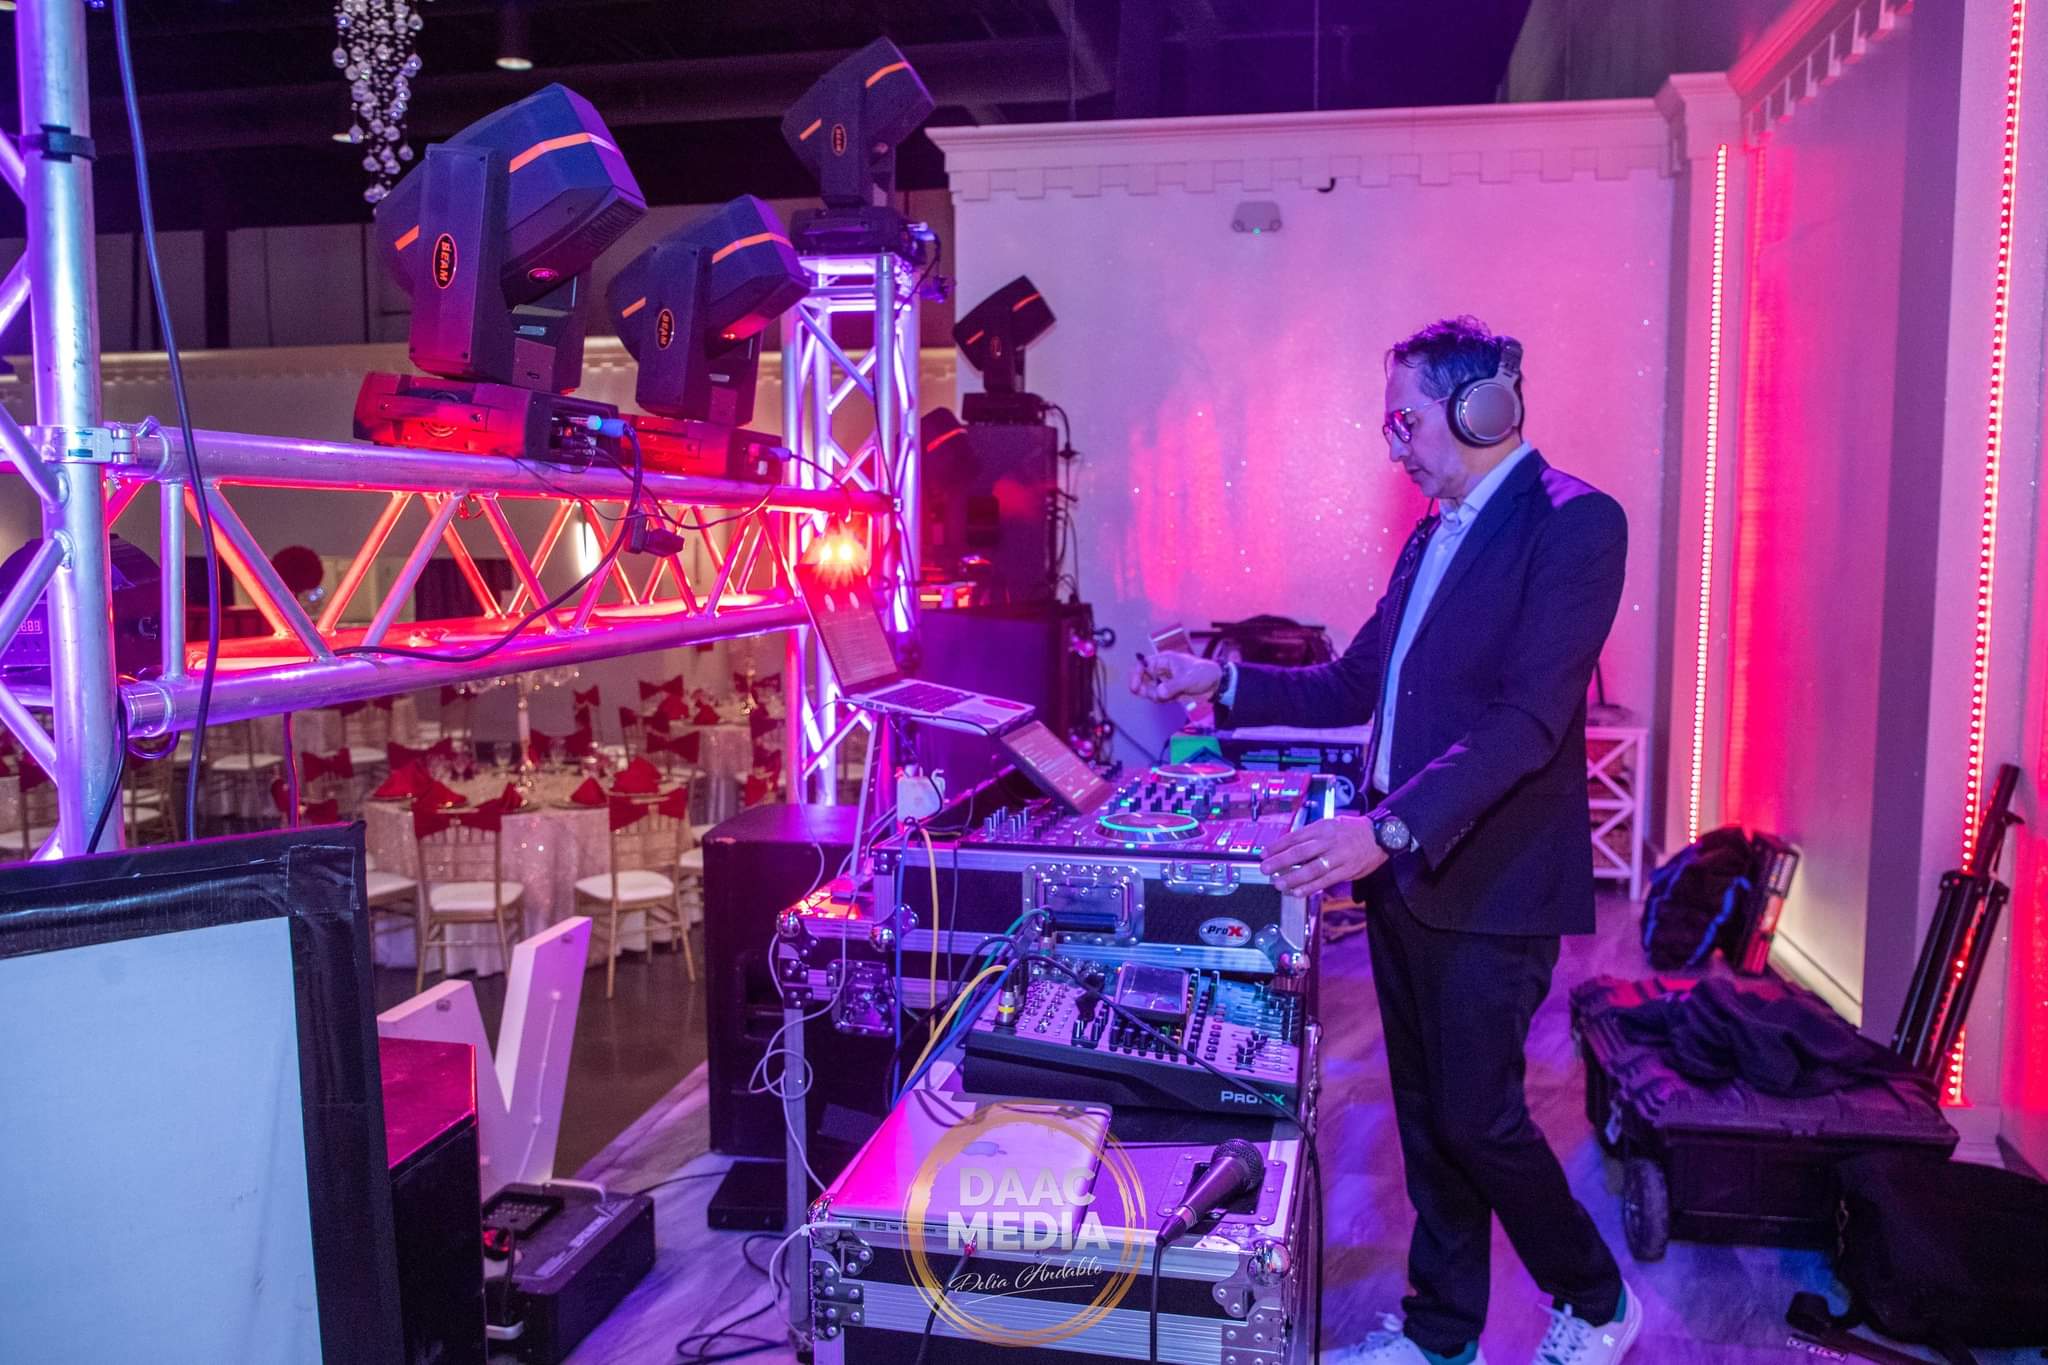 Entertainment, DJ's, Bands, Mariachi Bands, DJ Packages, Entertainment Packages, Dancing Robots, Dancing in the clouds, Lighting, Sound, Video Screens, Announcer, Music, Dancing, Entertainment Packages